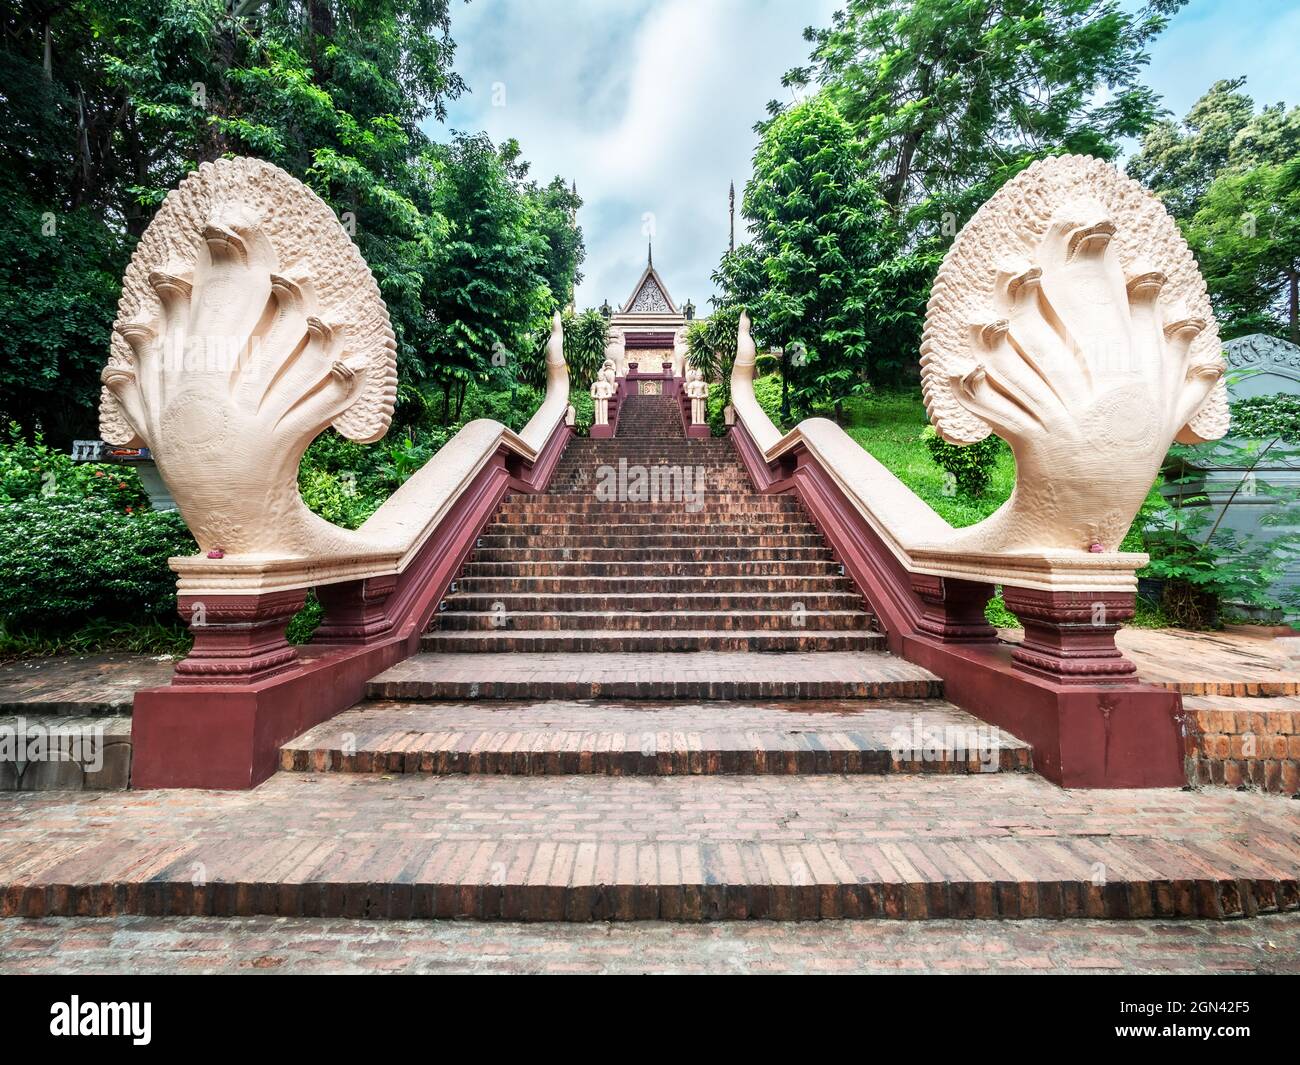 Old beautiful statues and sculptures in front of the famous Buddhist Temple in Wat Phnom Hill, Cambodia Stock Photo